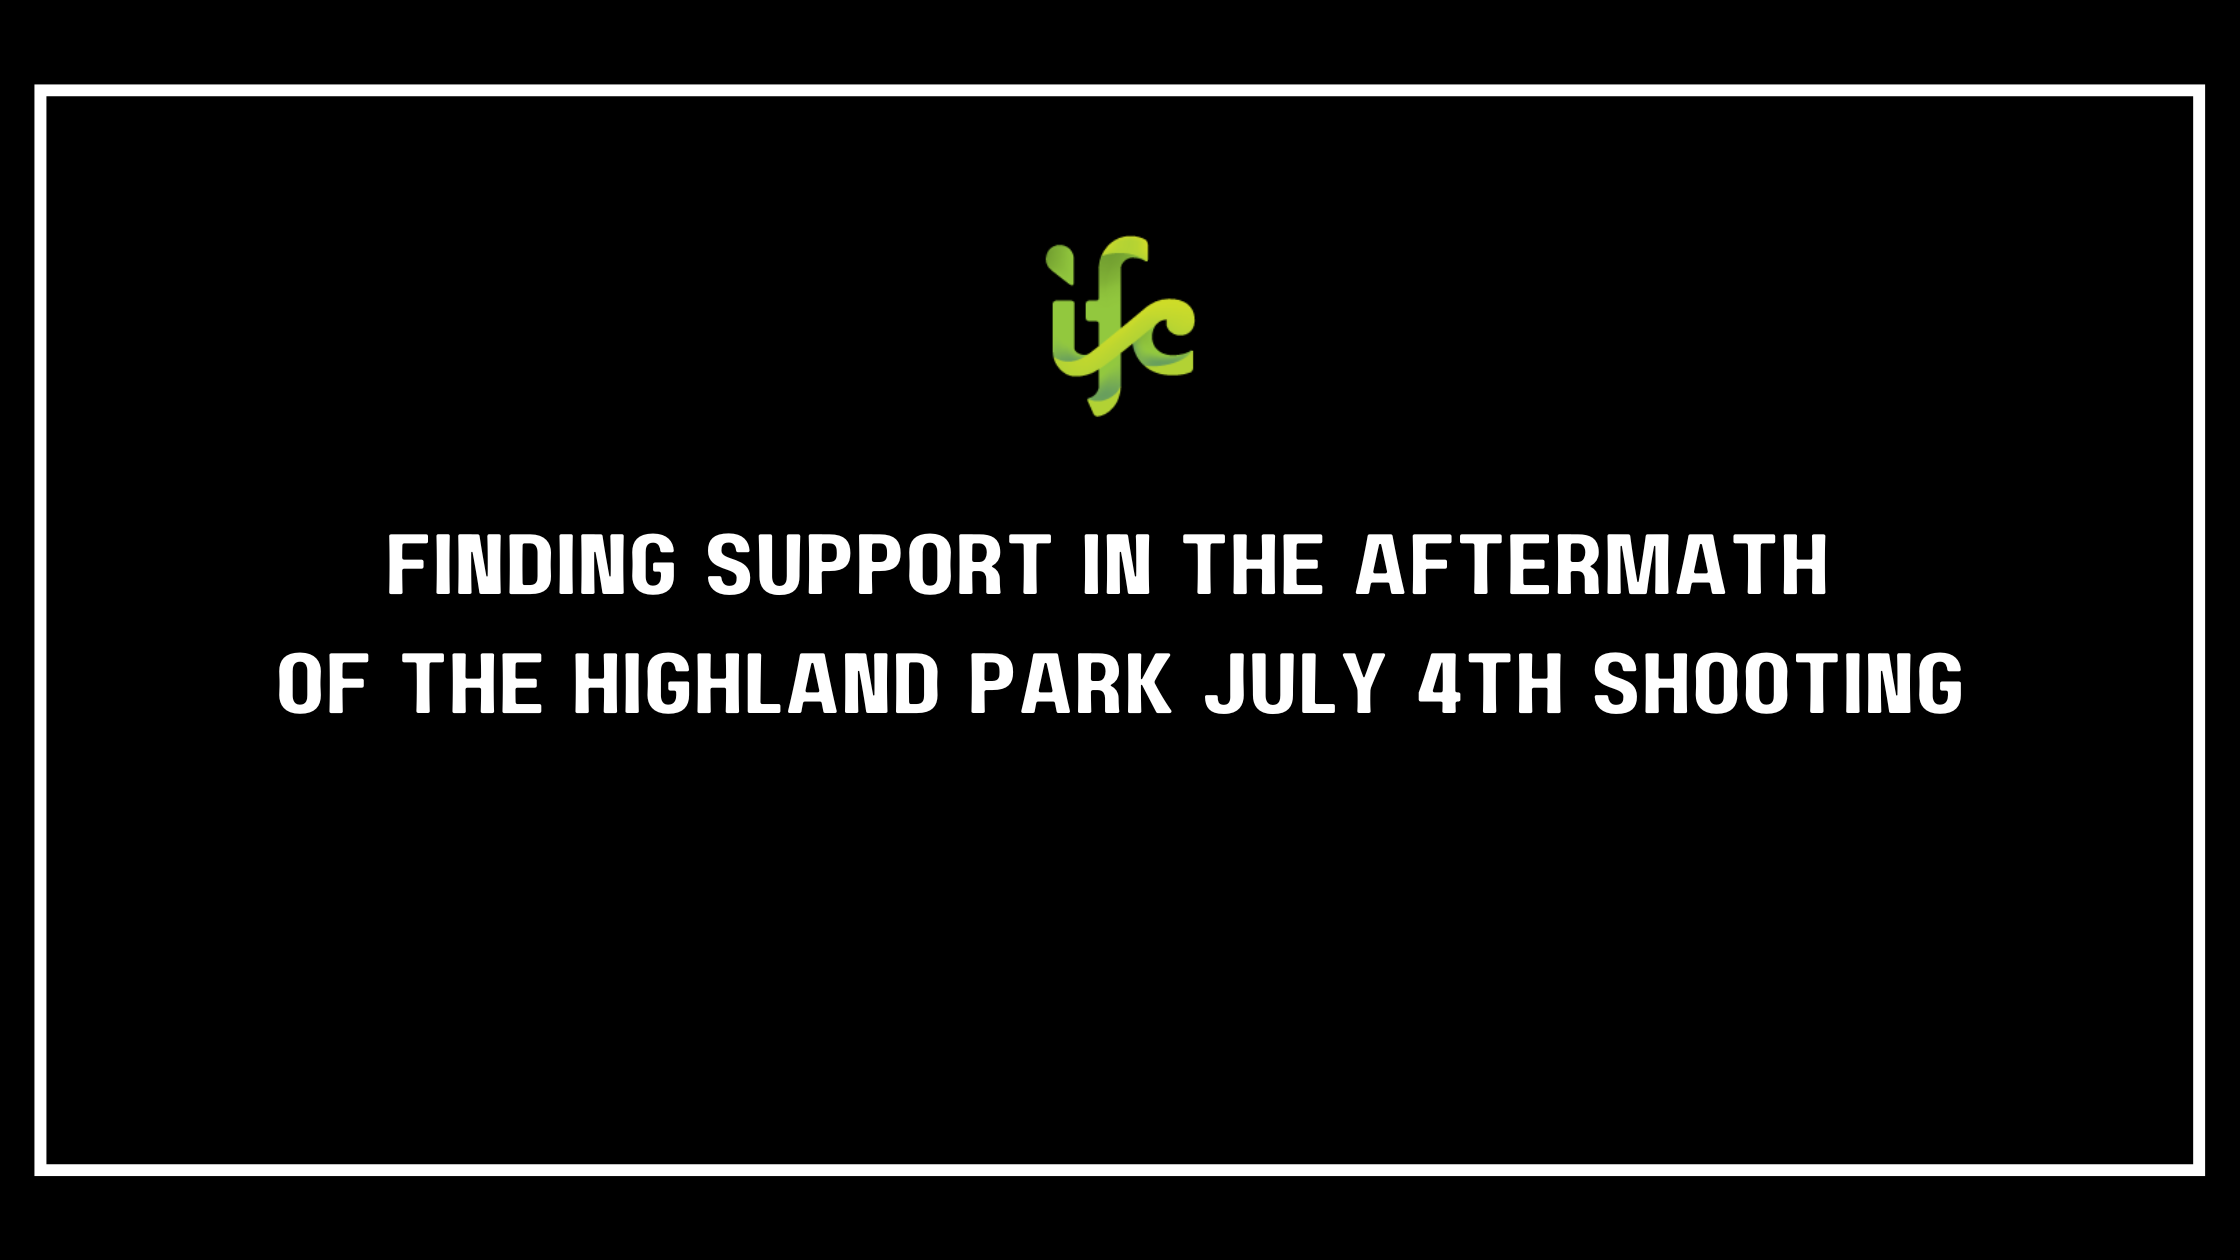 black background with green IFC logo. White text that says "Finding Support in the Aftermath of the Highland Park July 4th Shooting"